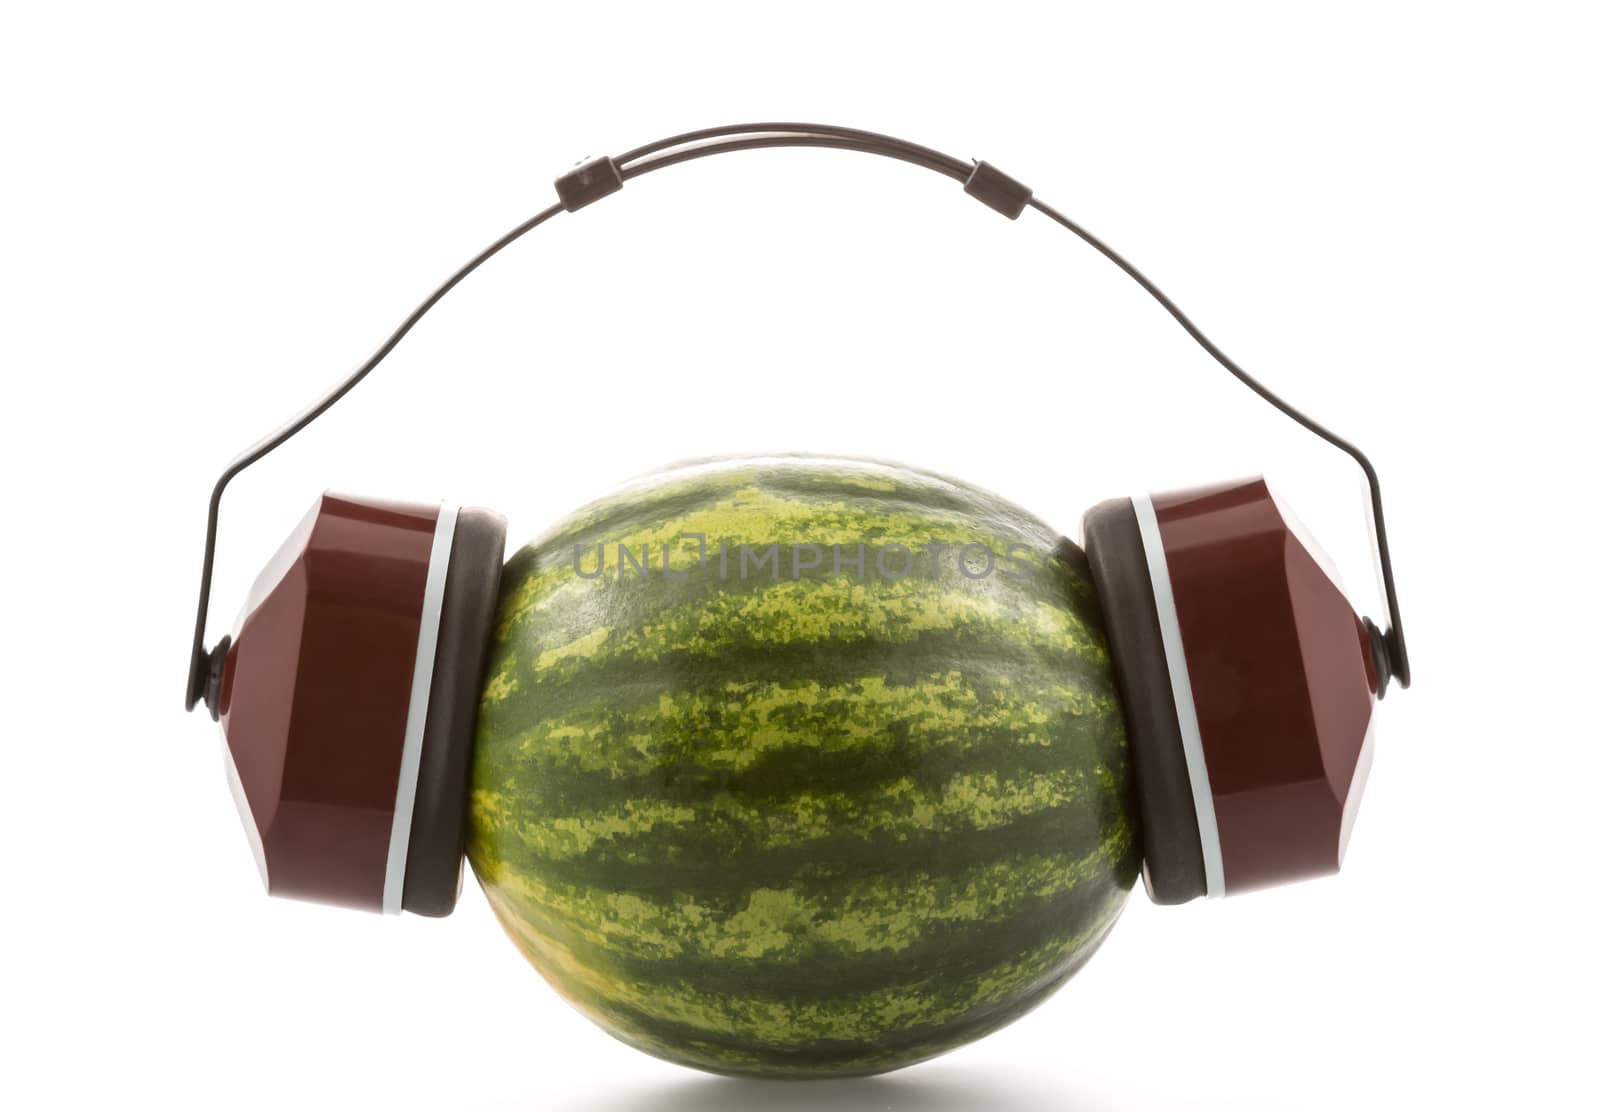 Watermelon in headphones  by Marcus